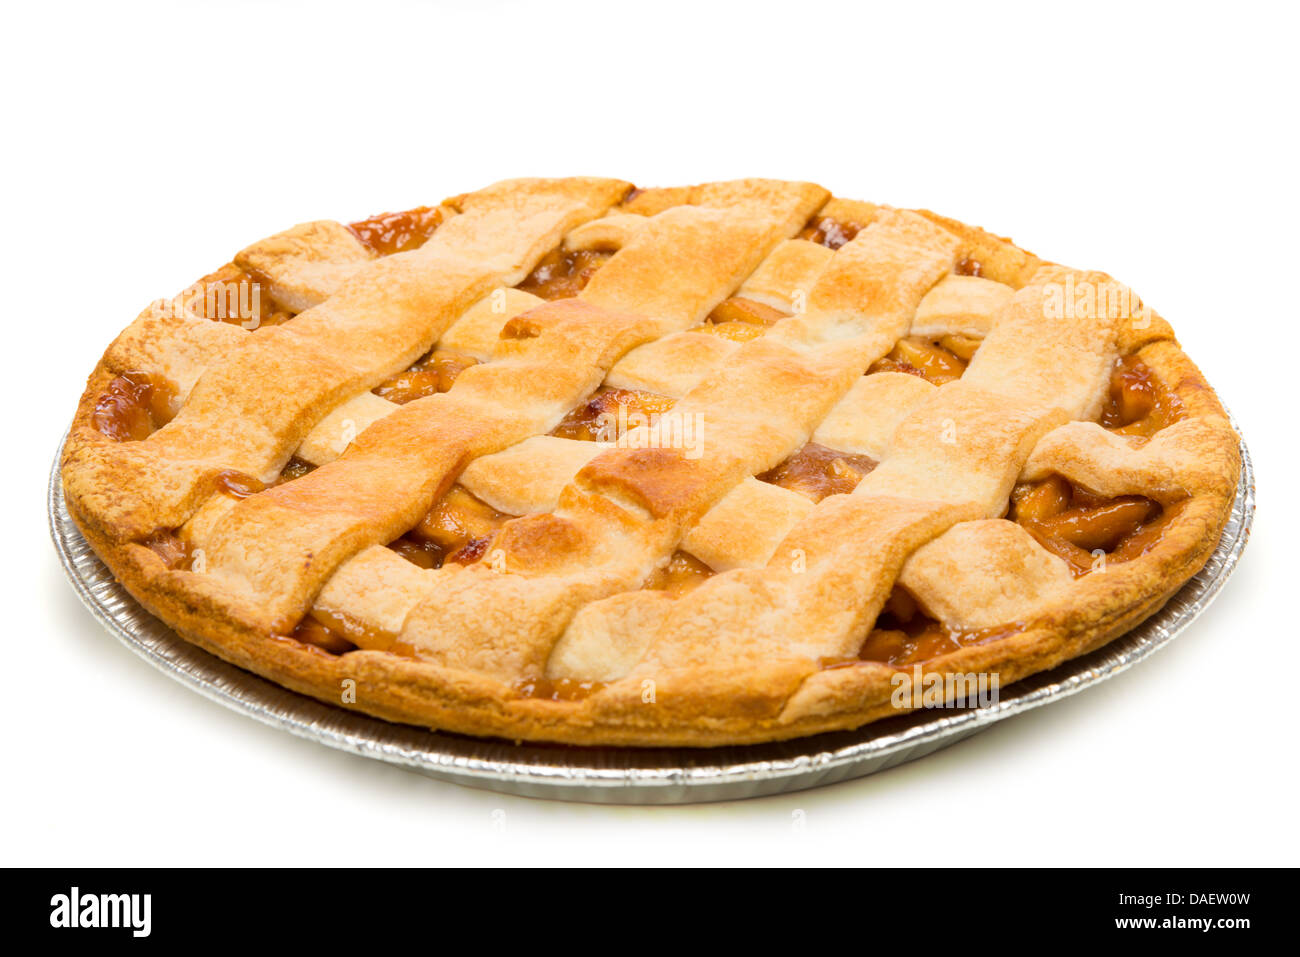 A delicious Apple Pie on a white background Stock Photo